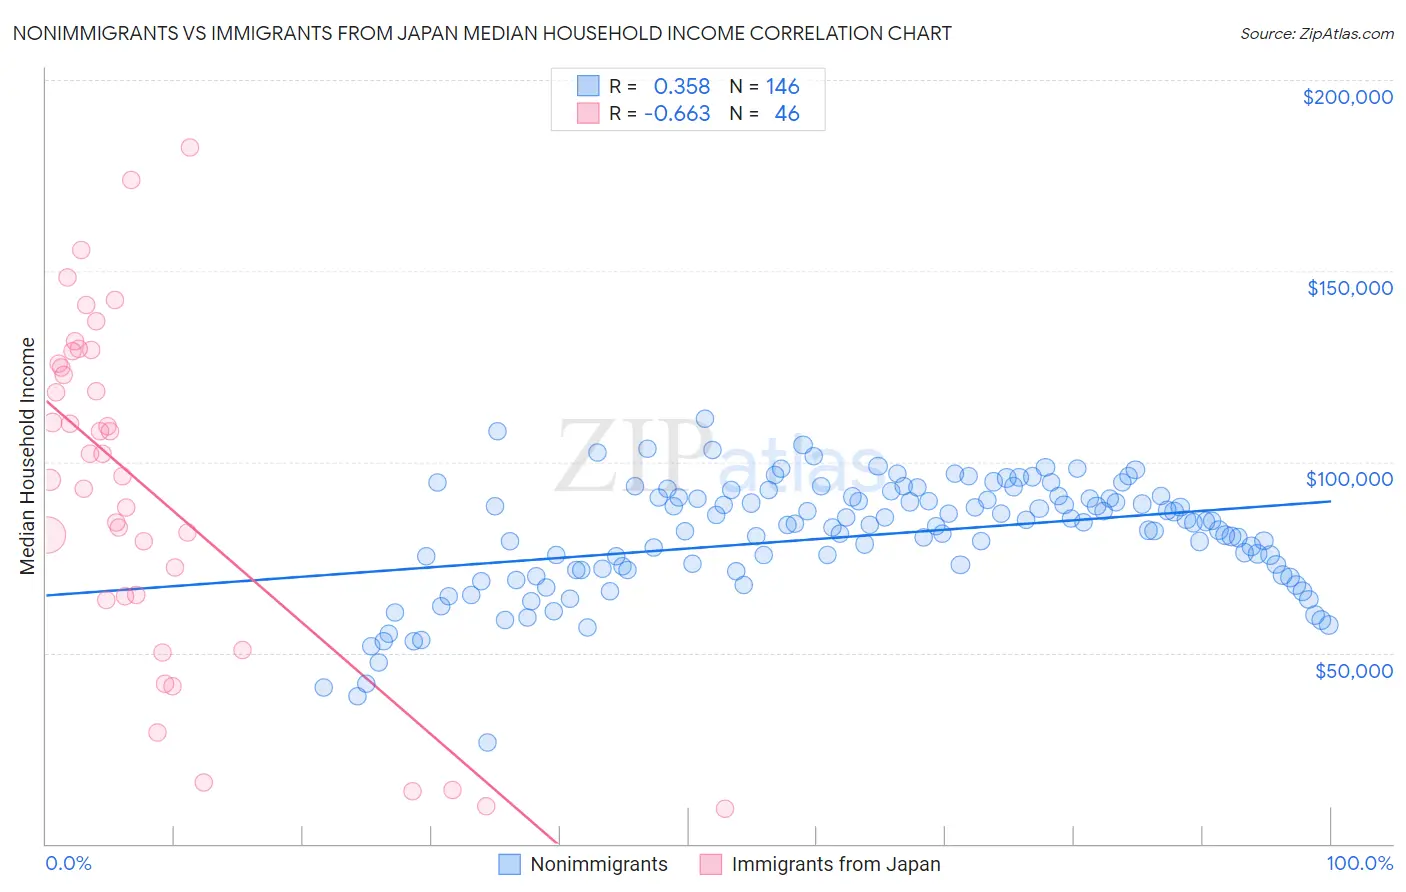 Nonimmigrants vs Immigrants from Japan Median Household Income